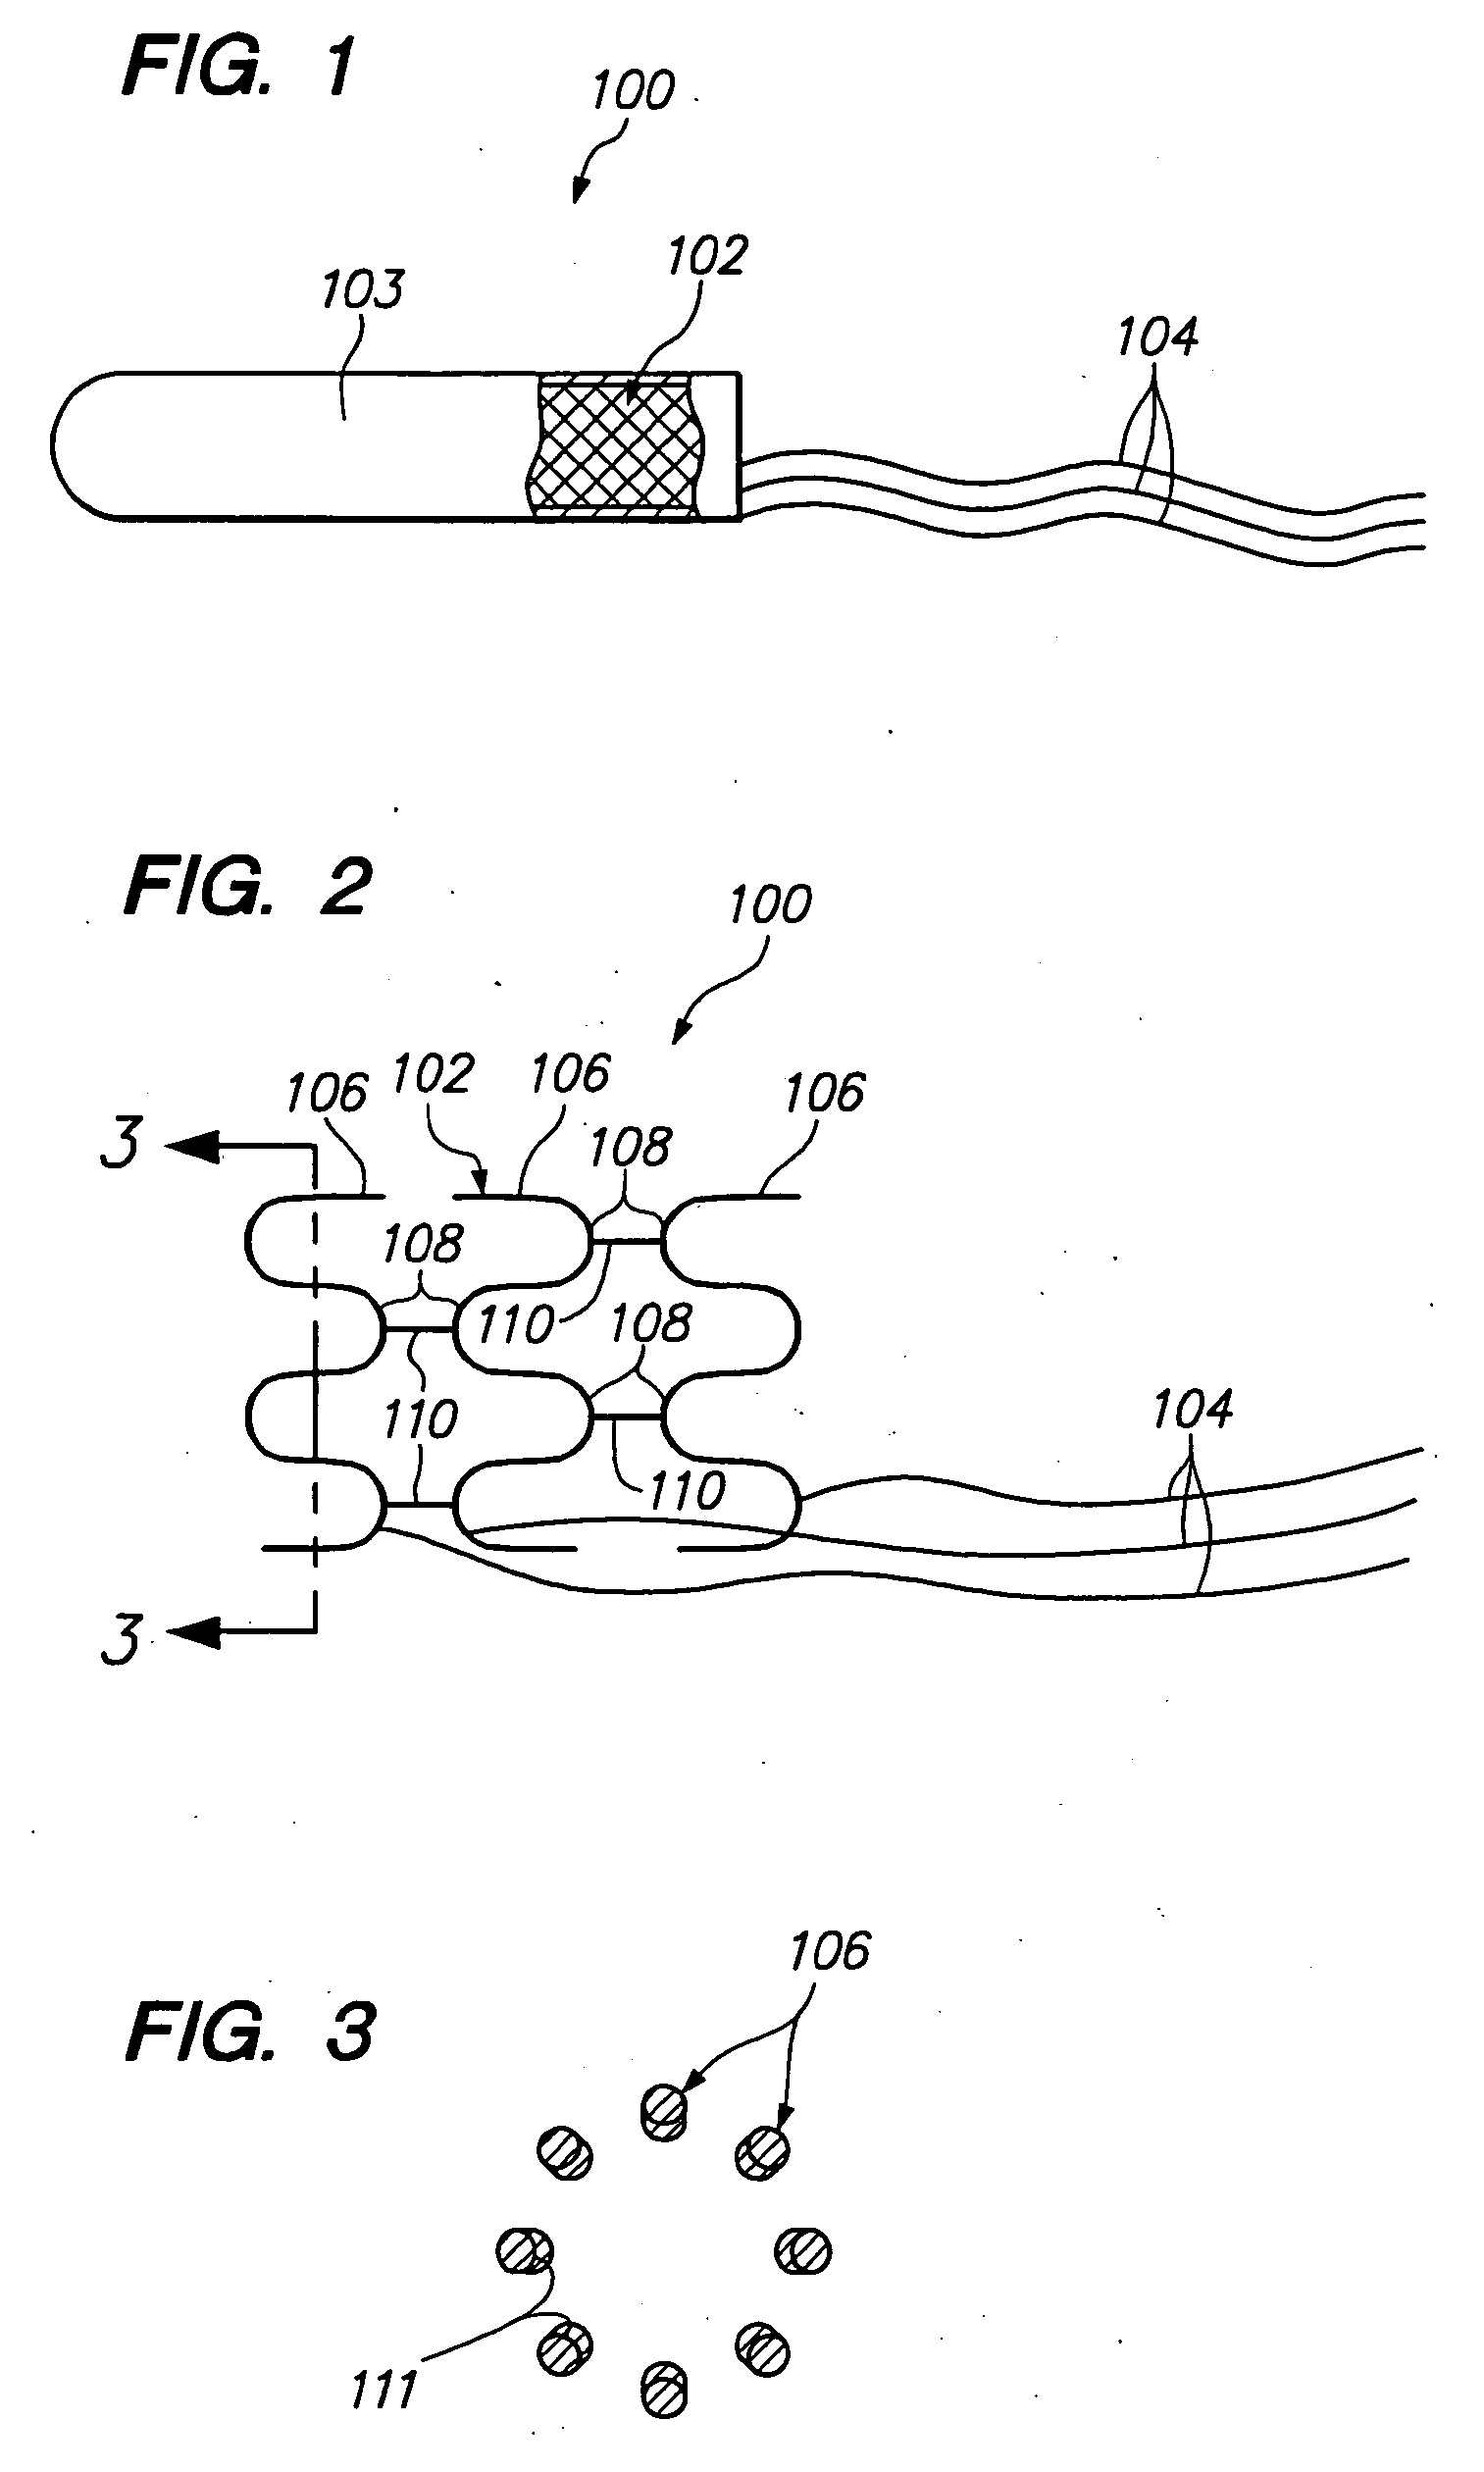 Intravascular self-anchoring electrode body with springs loops or arms